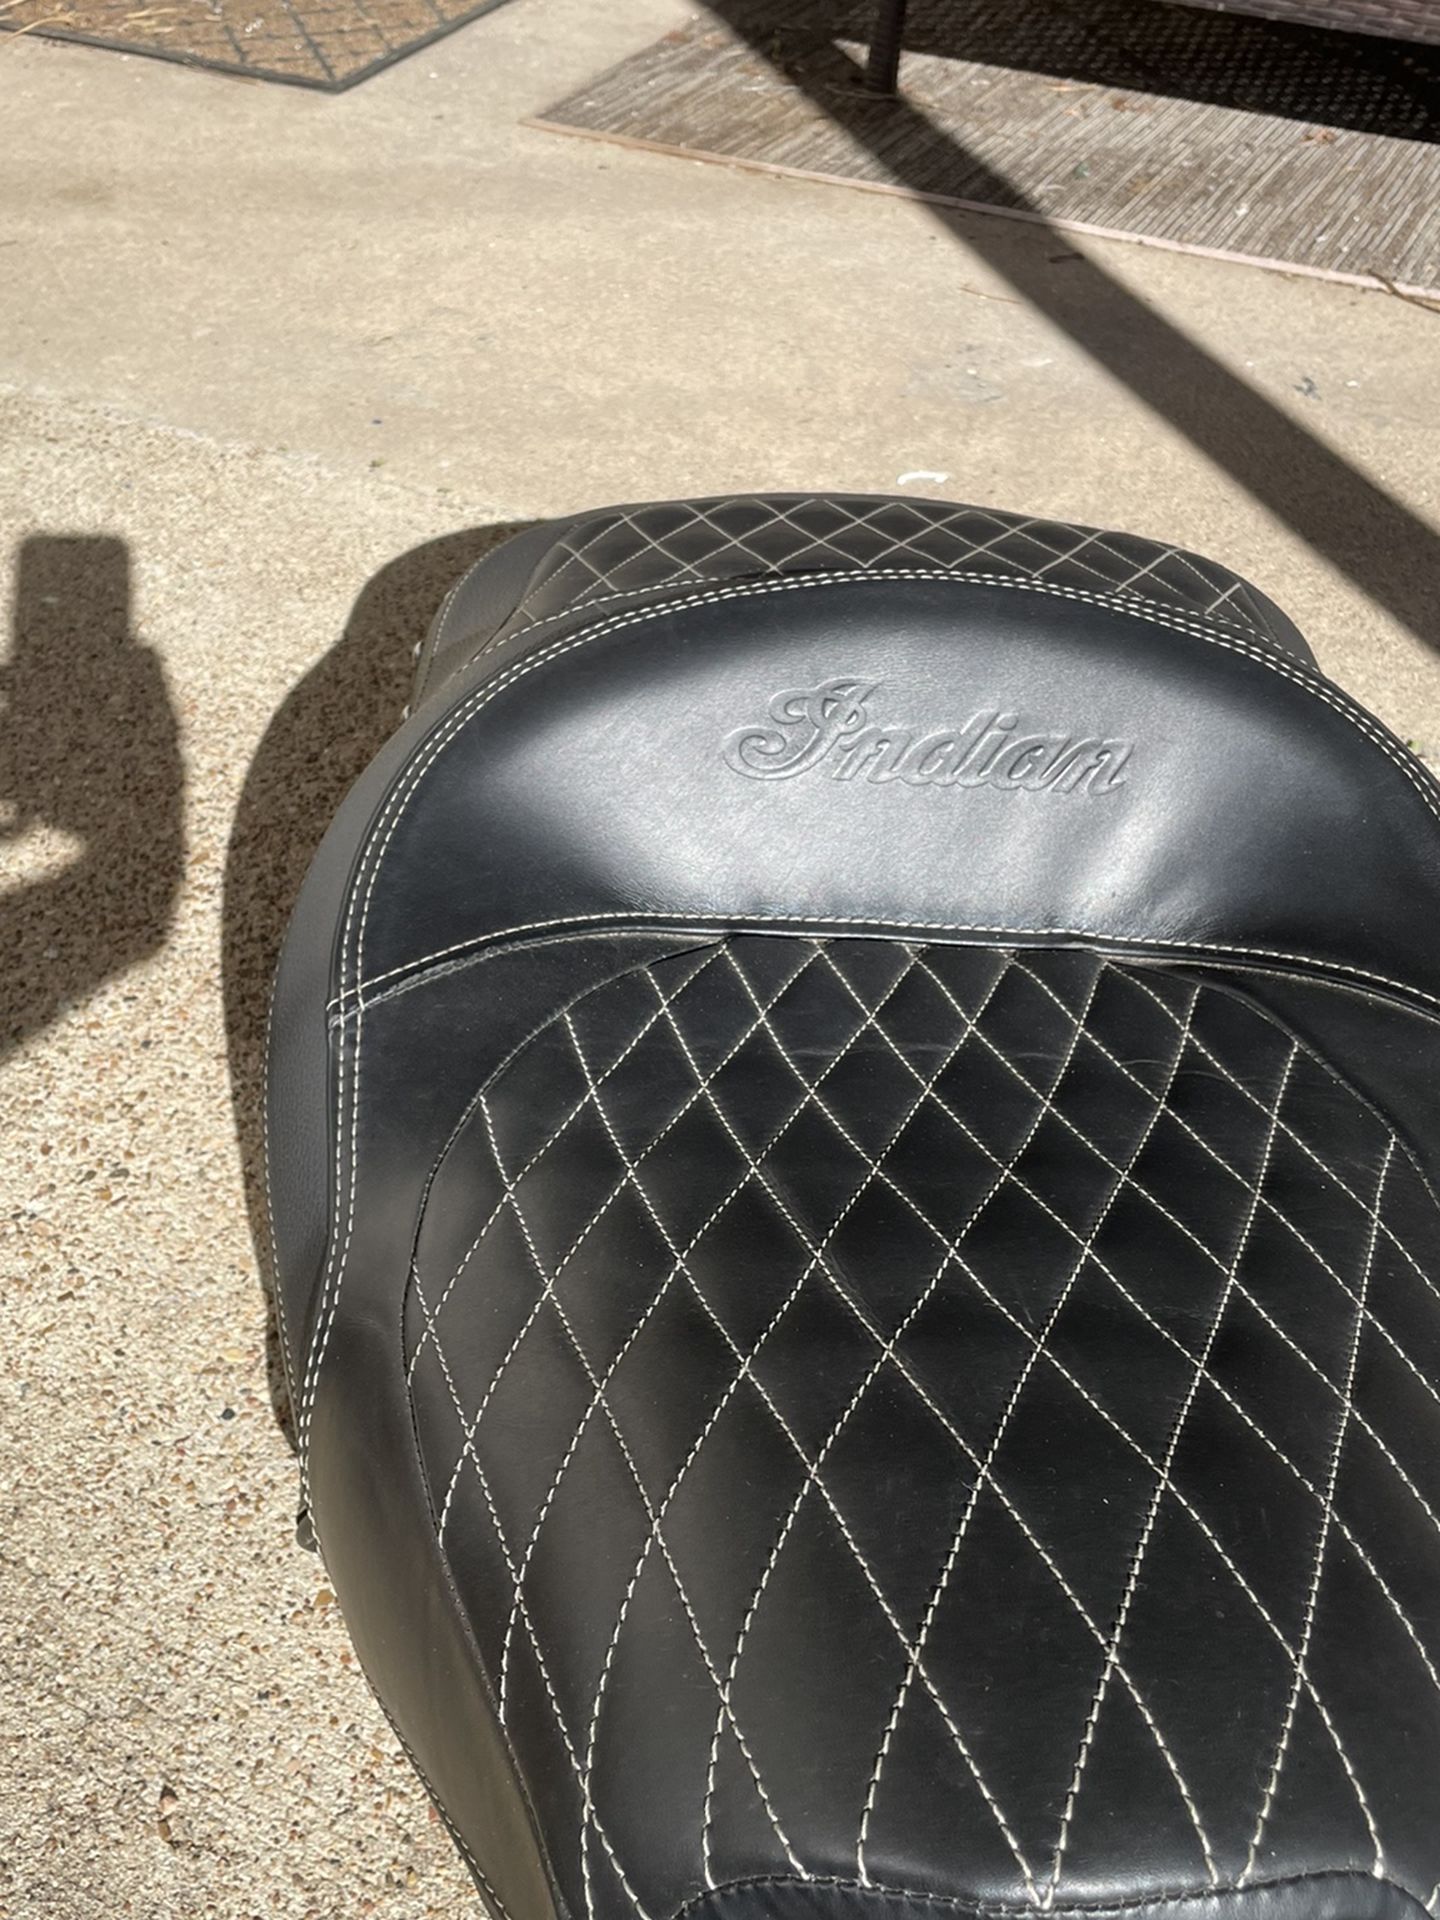 Heated Indian Motorcycle Seat